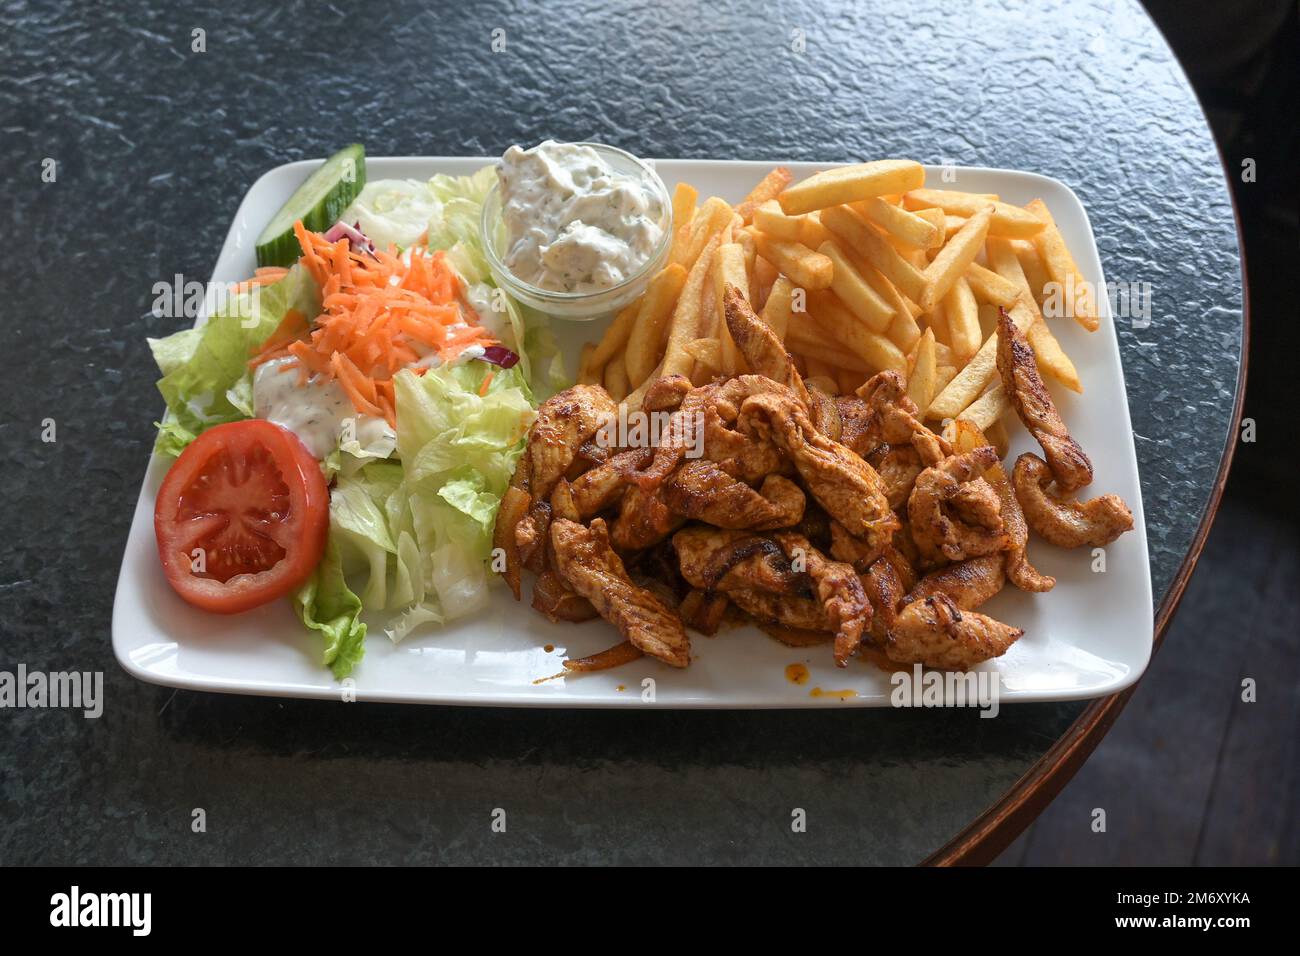 Fried chicken dish with fries, salad and cream dip on a square plate served on a black table in a fast food restaurant, selected focus, narrow depth o Stock Photo